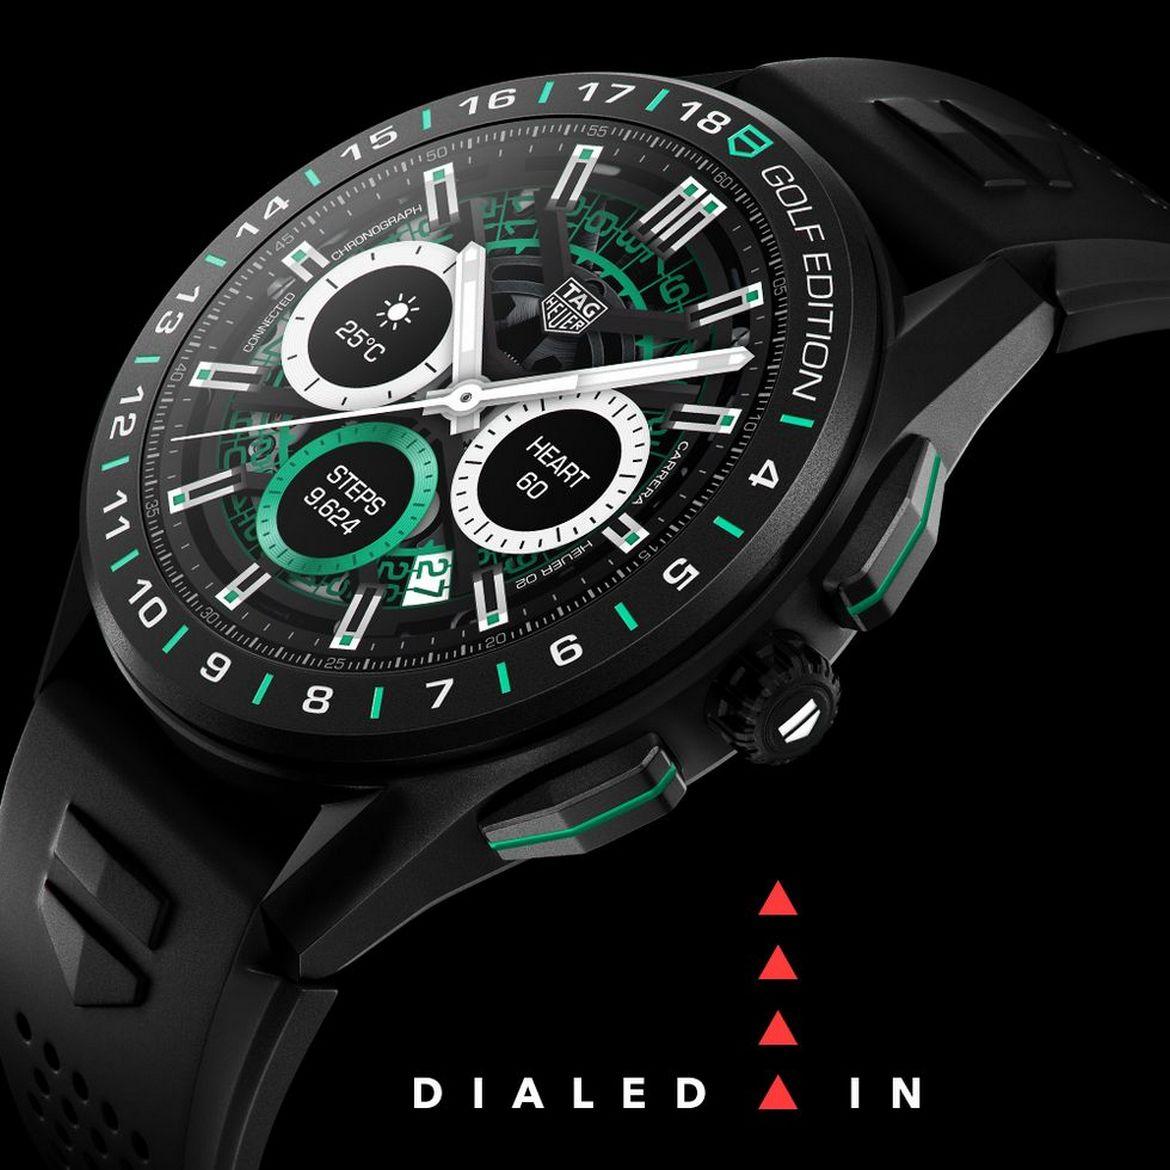 Tag Heuer's new smartwatch will change the face of your next golf game ...